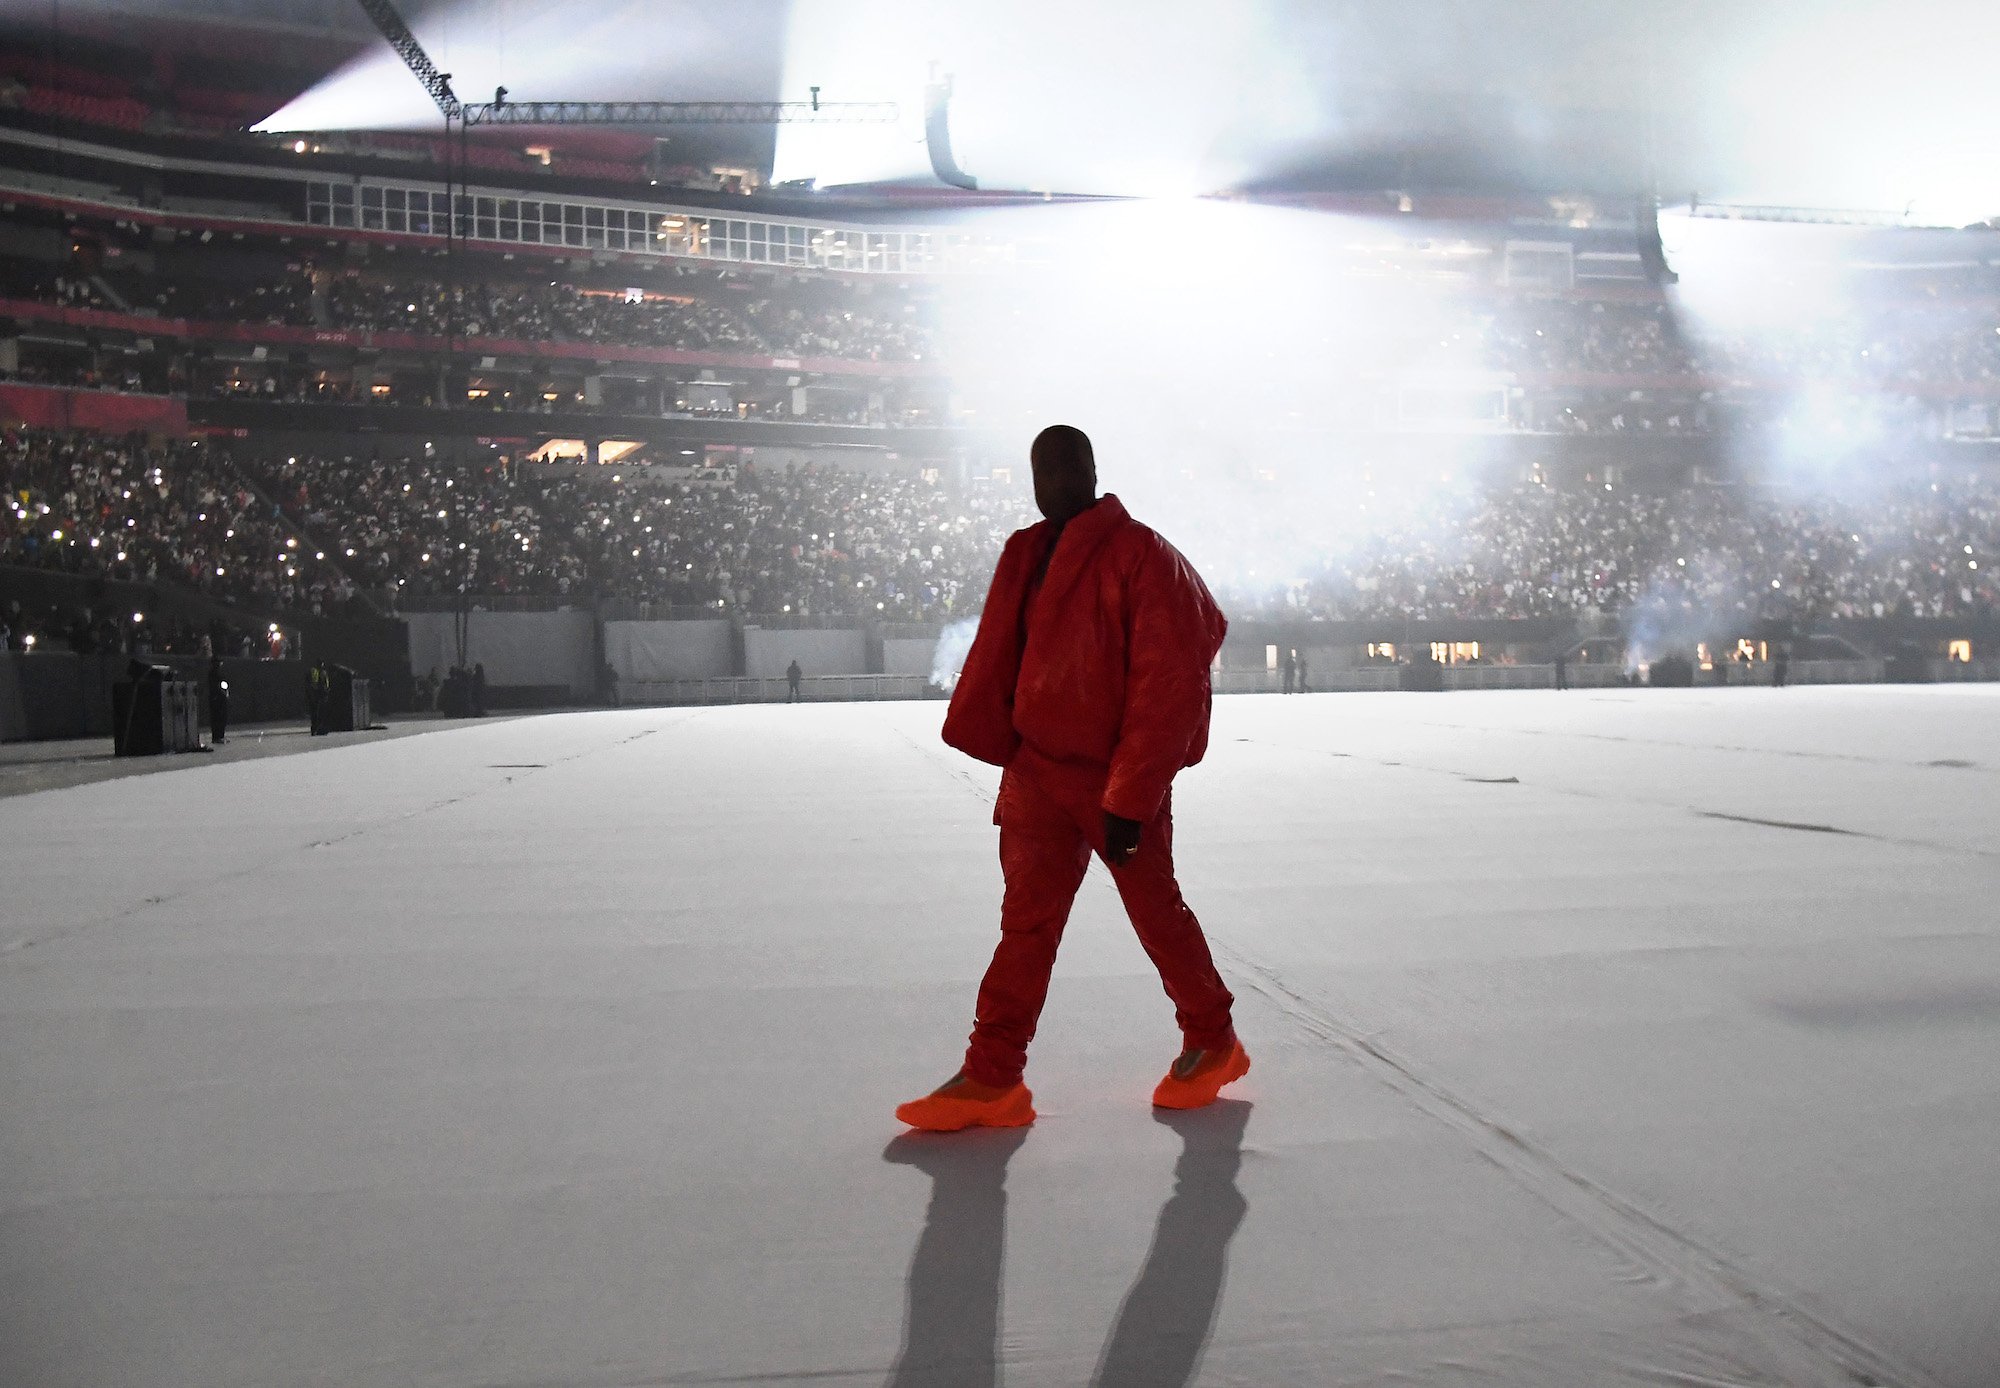 Kanye West performing onstage at listening party for his new album 'DONDA' 